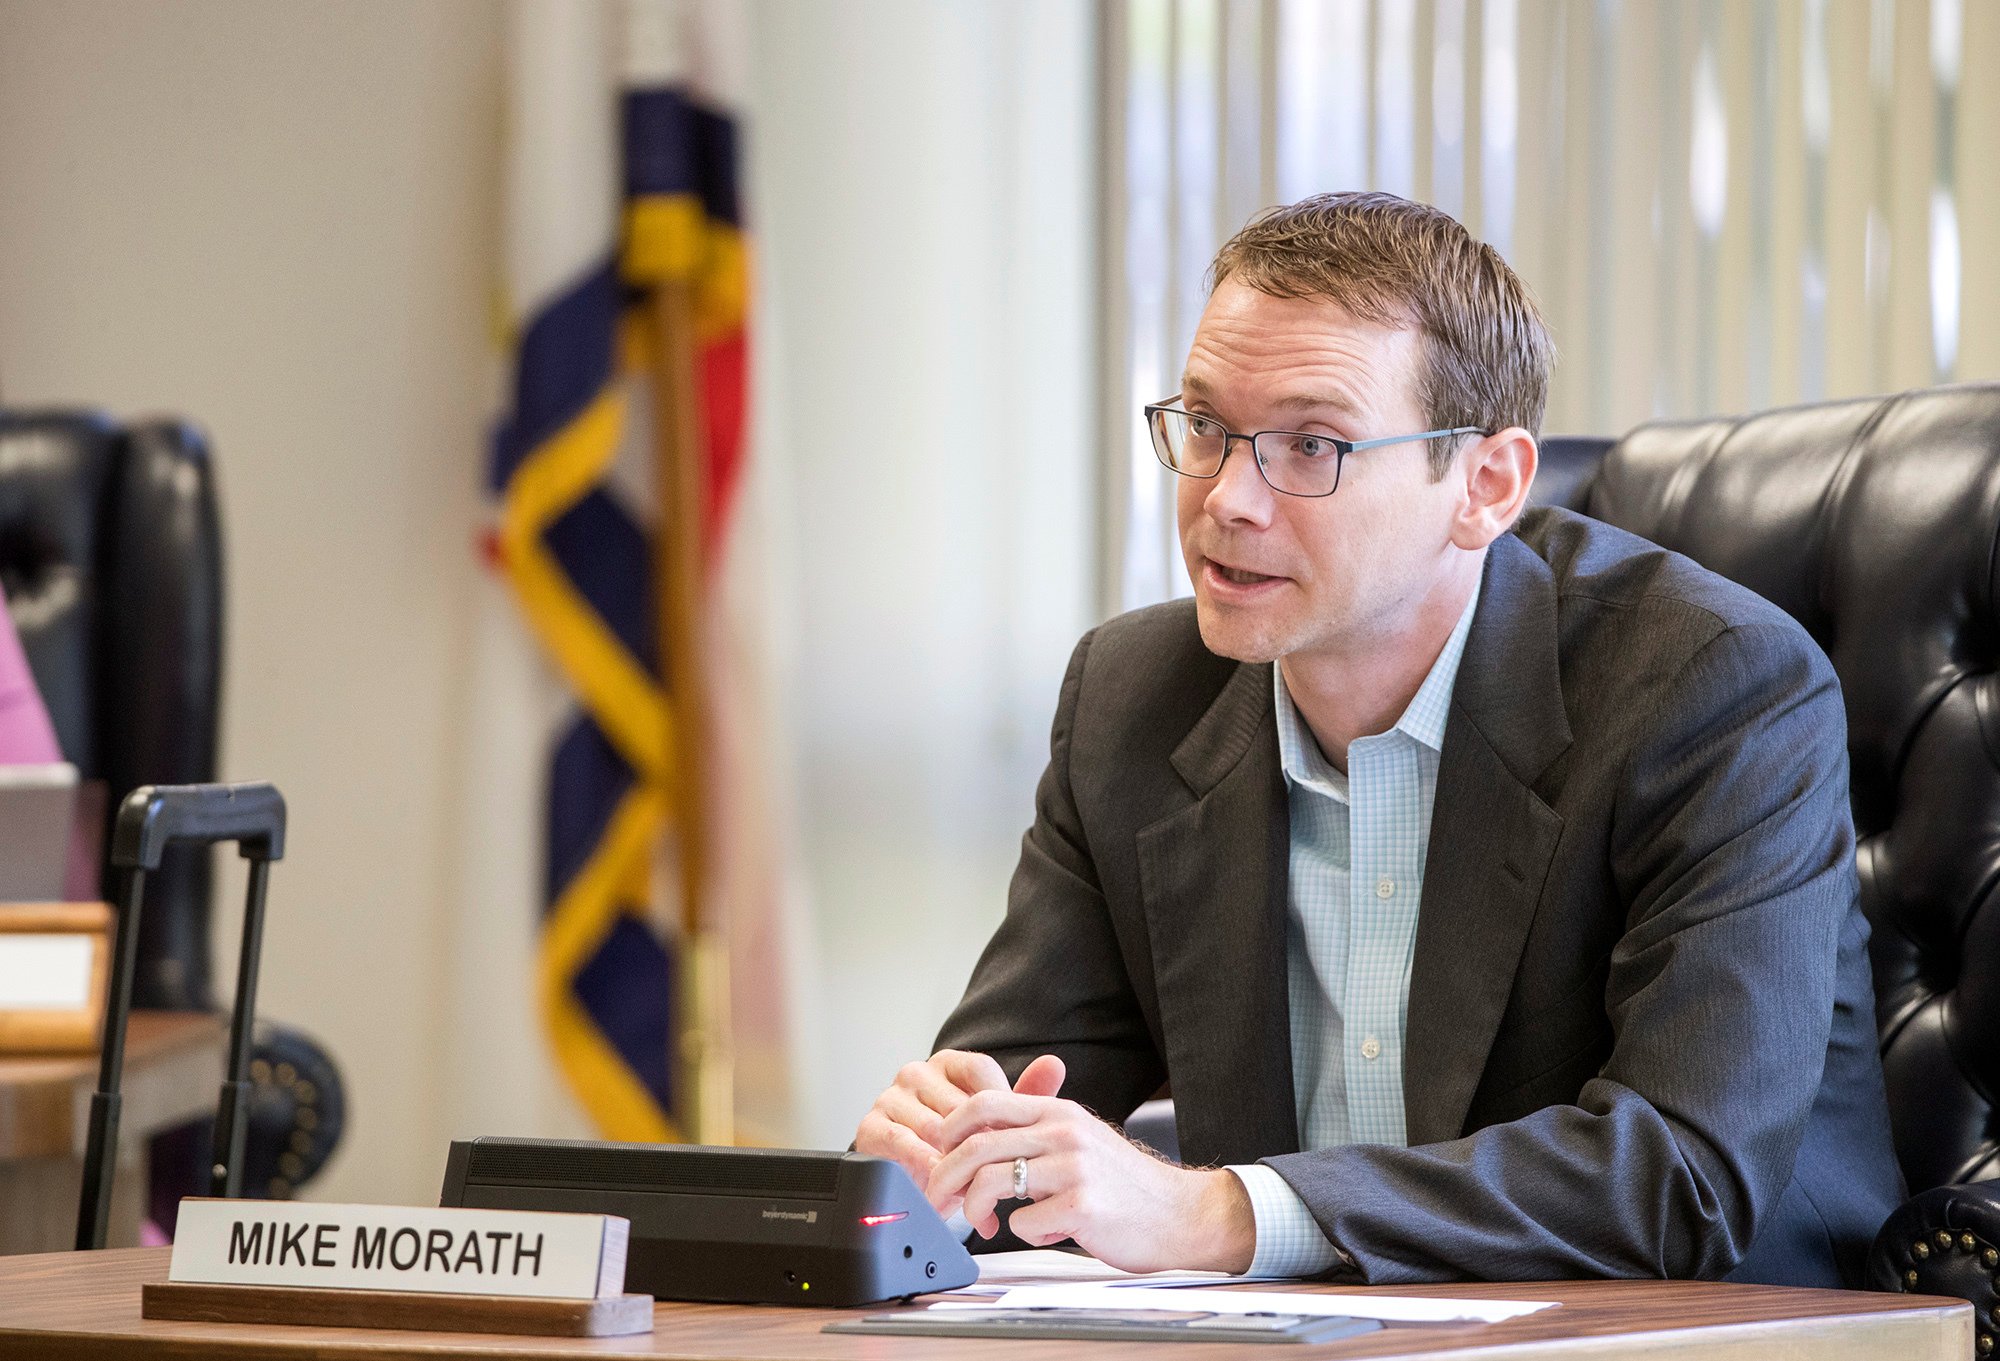 Mike Morath sits in his office, wearing a suit jacket and button-down shirt without a tie. He is a white man with short brown hair and glasses.